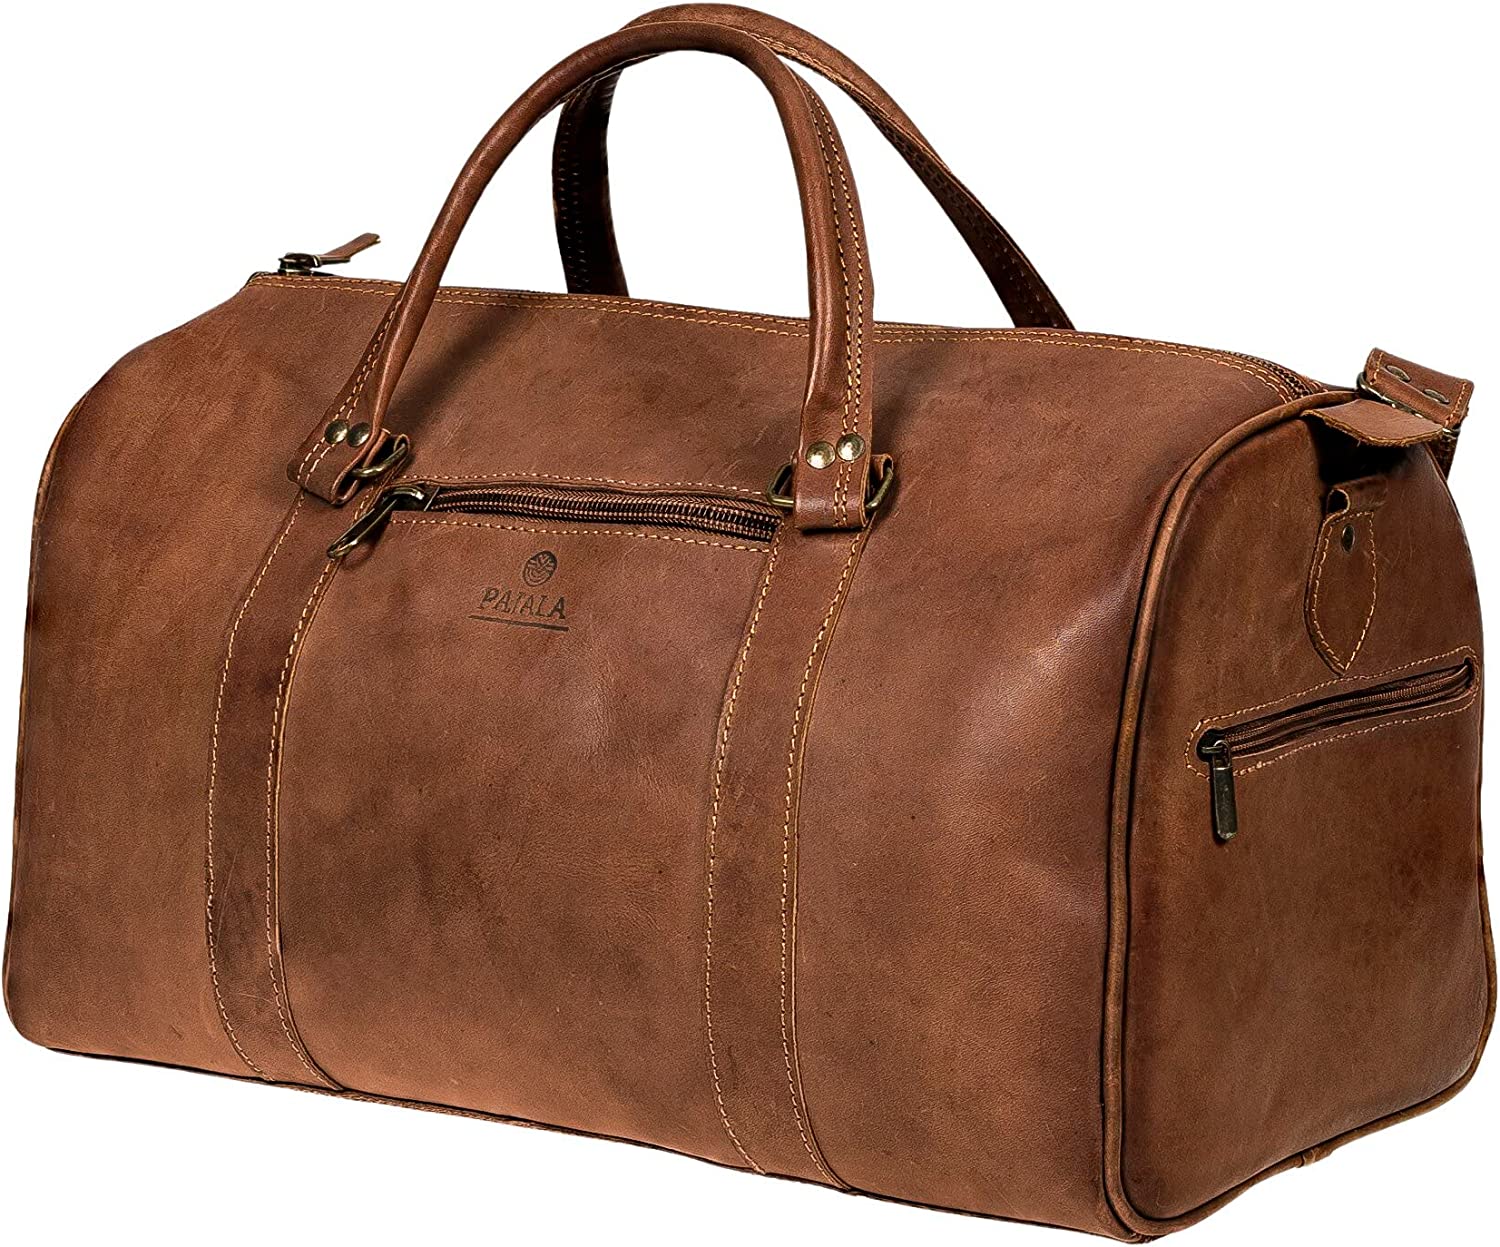 Real leather travel bag tested in 2022